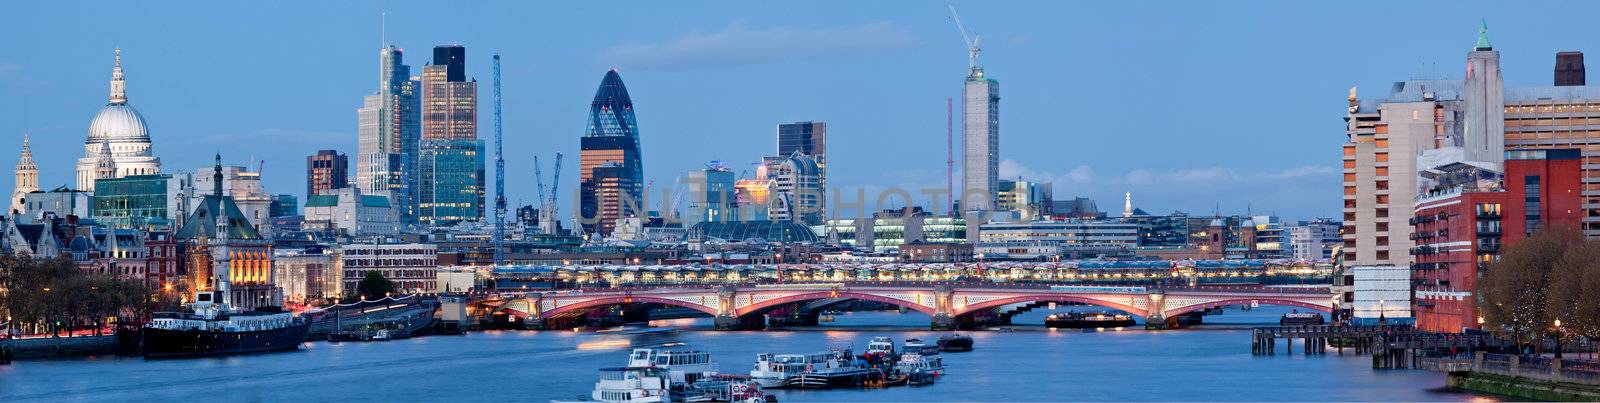 Panorama of St. Paul Cathedral and Skylines From Waterloo Bridge along River Thames in London England United Kingdom